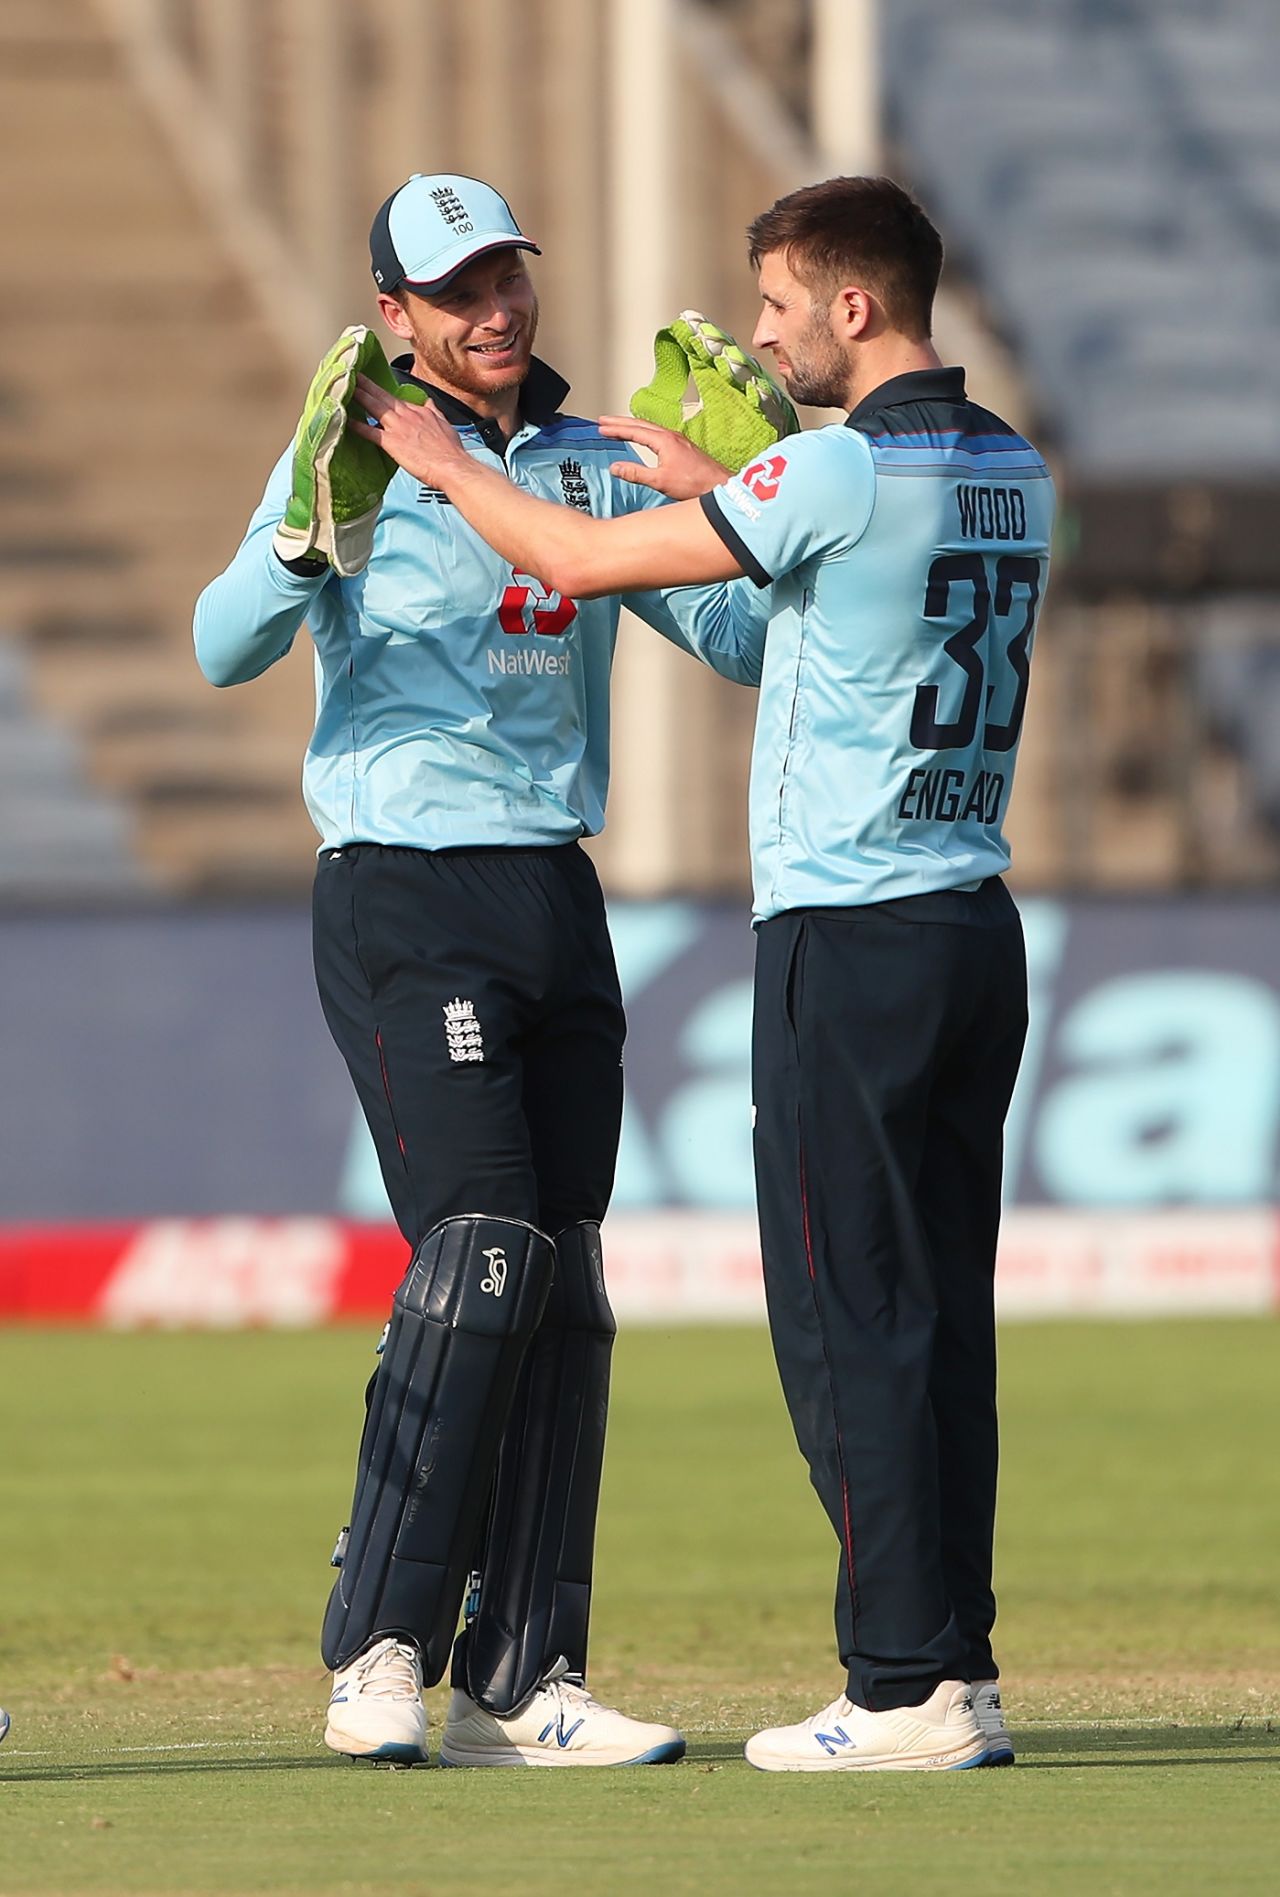 Mark Wood celebrates a wicket with Jos Buttler, India vs England, 3rd ODI, Pune, March 28, 2021